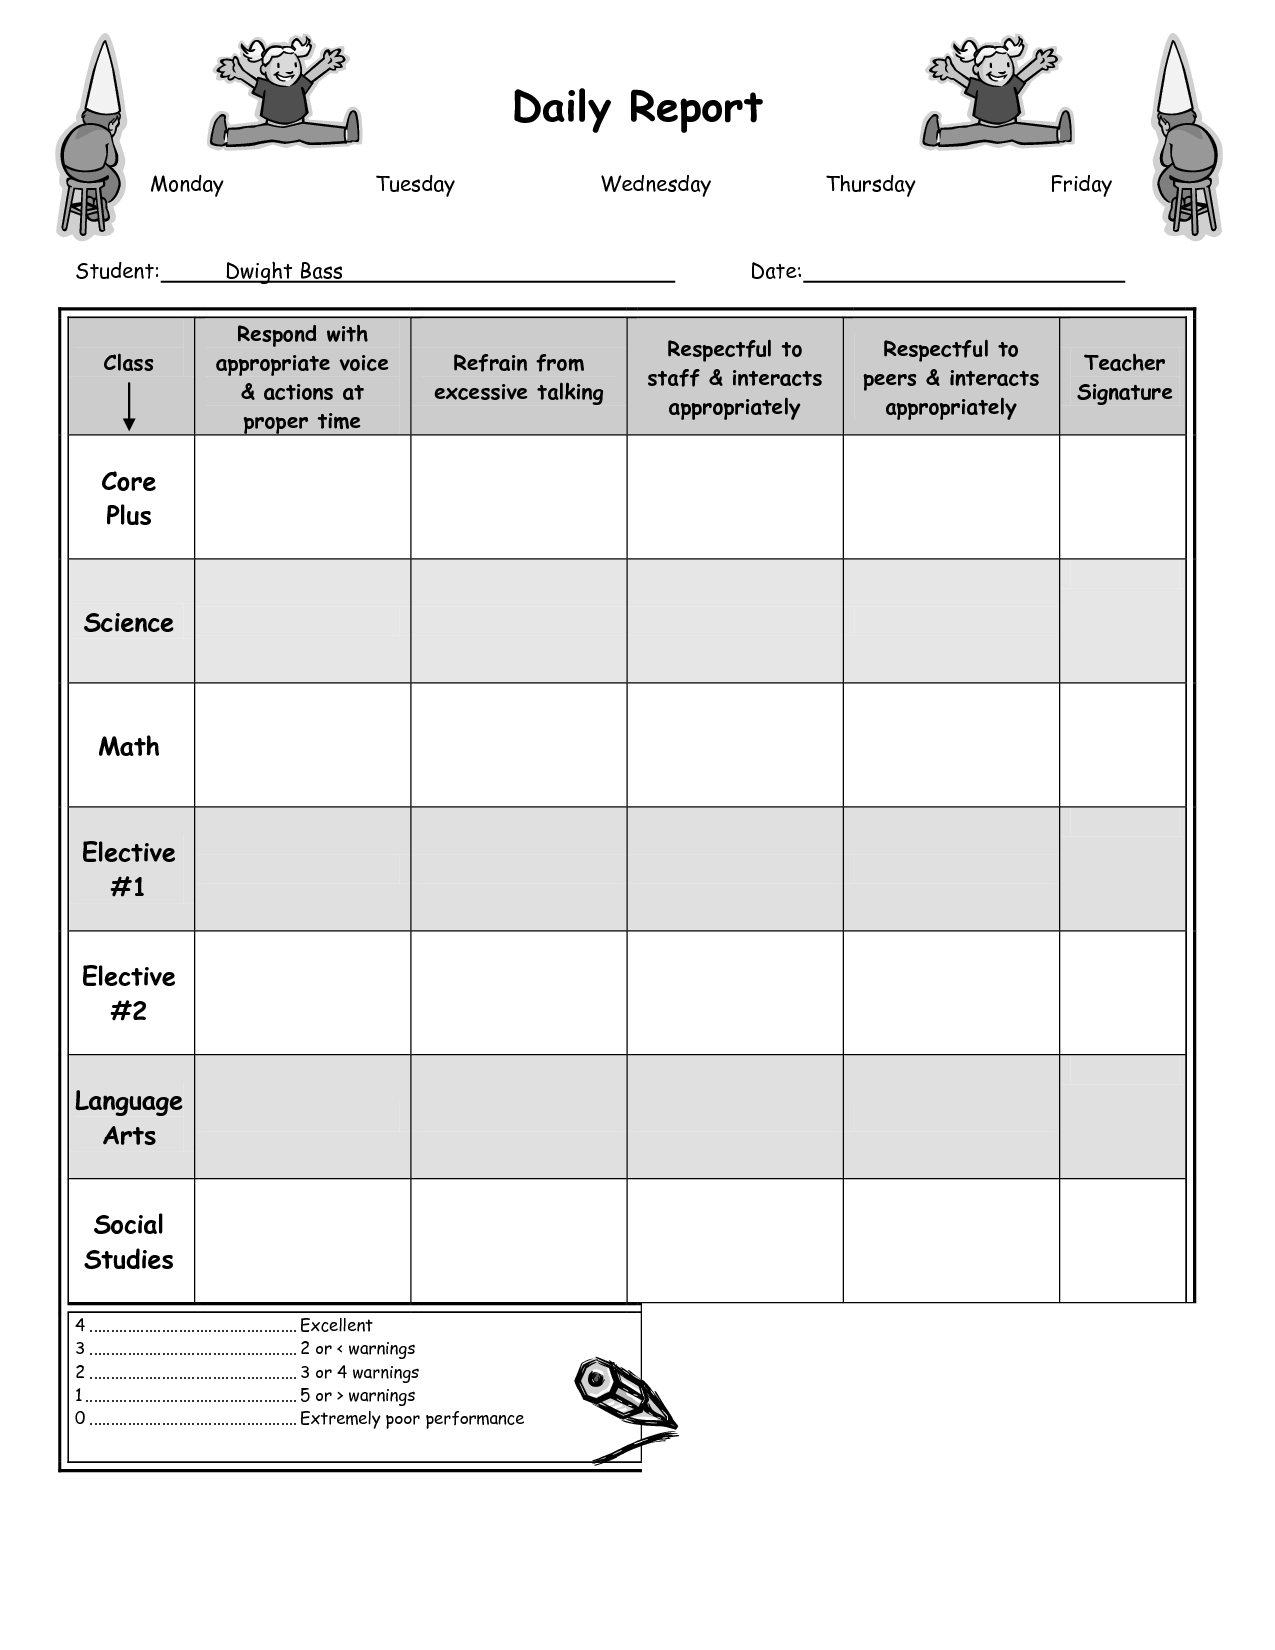 Daily Report Card Template For Adhd ] - Daily Behavior With Daily Report Card Template For Adhd